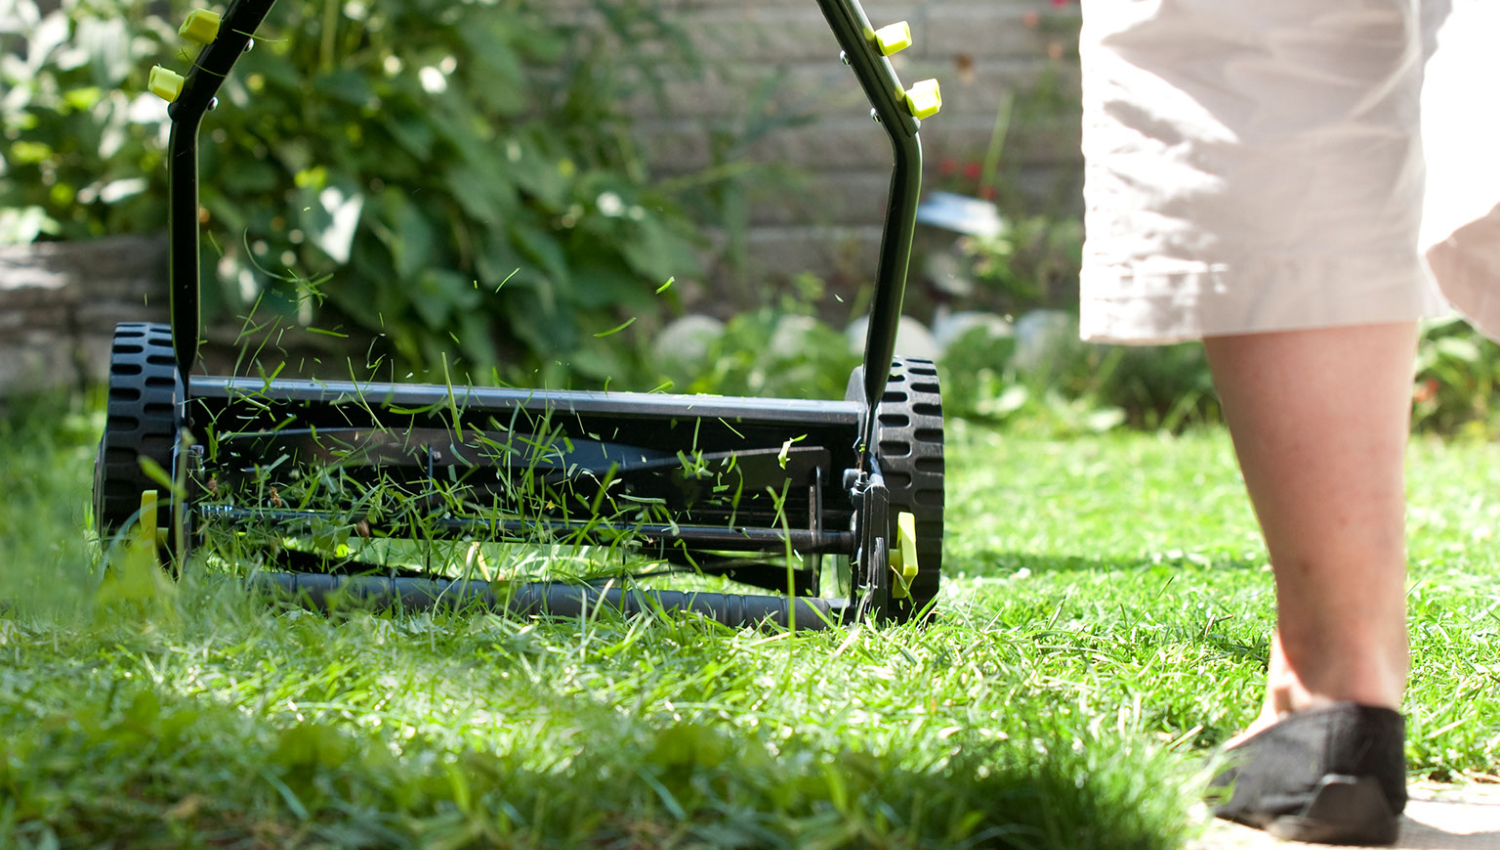 Women Mowing With Push Mower